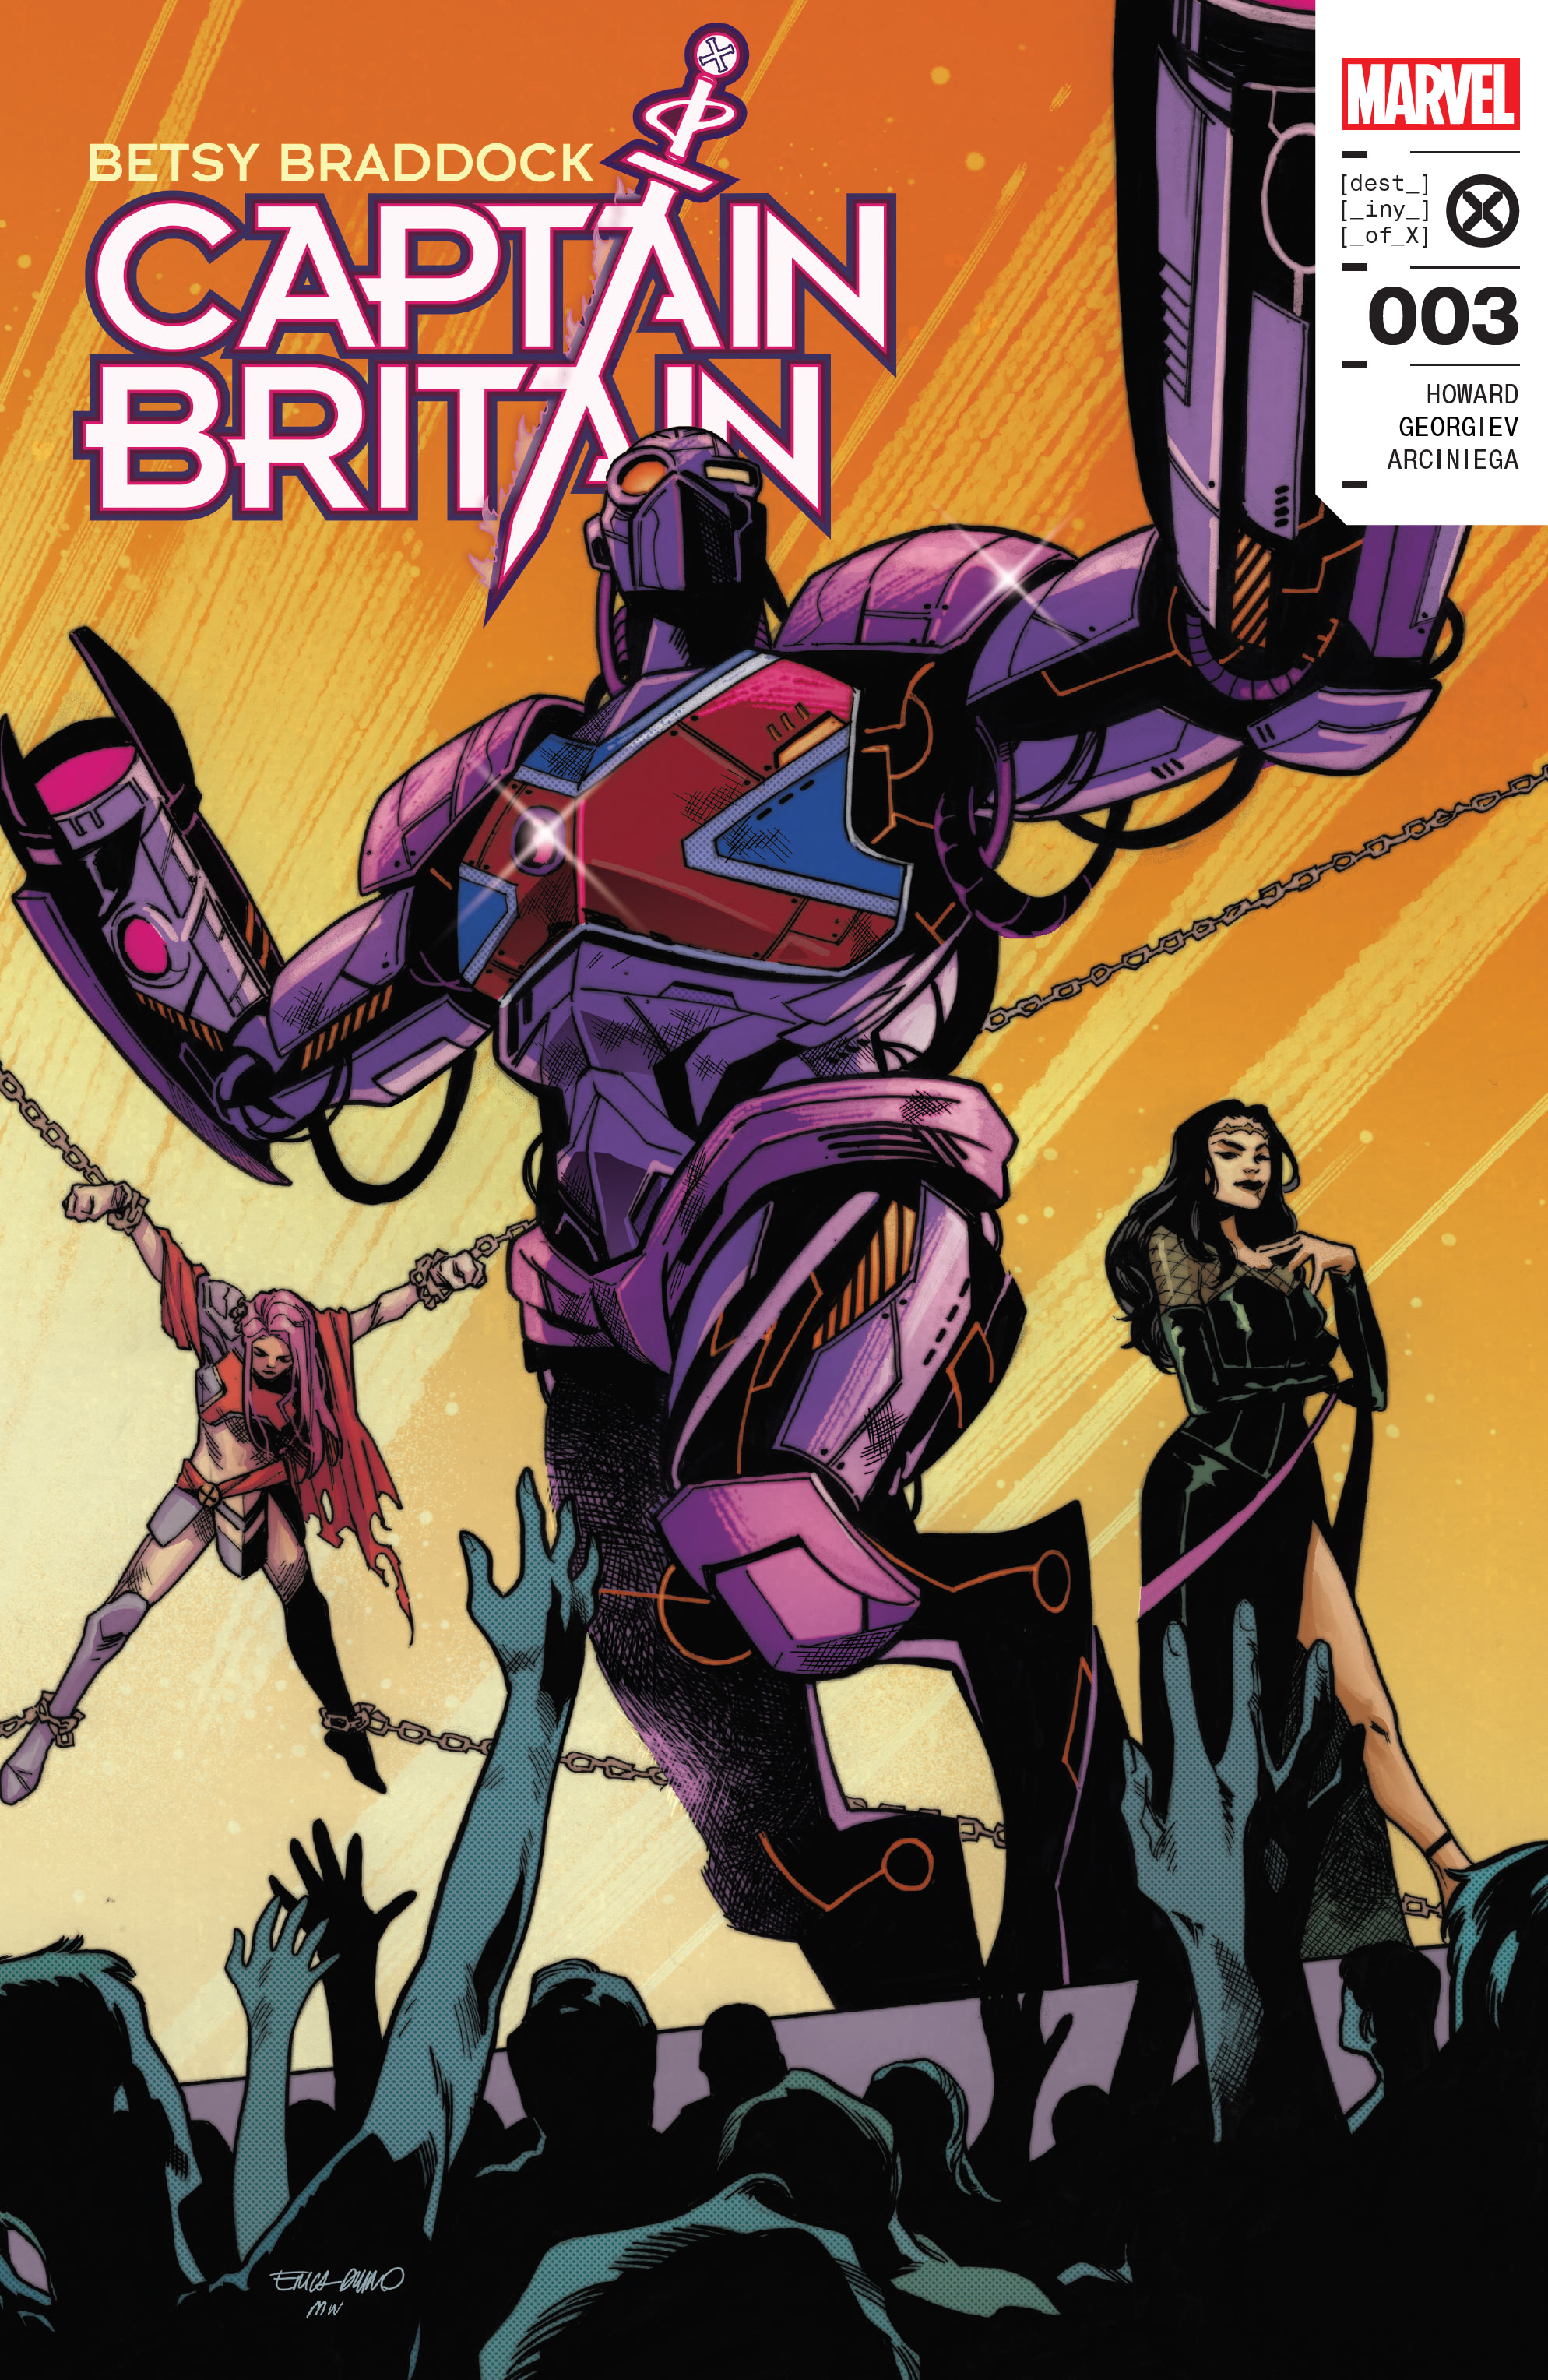 Read online Betsy Braddock: Captain Britain comic -  Issue #3 - 1